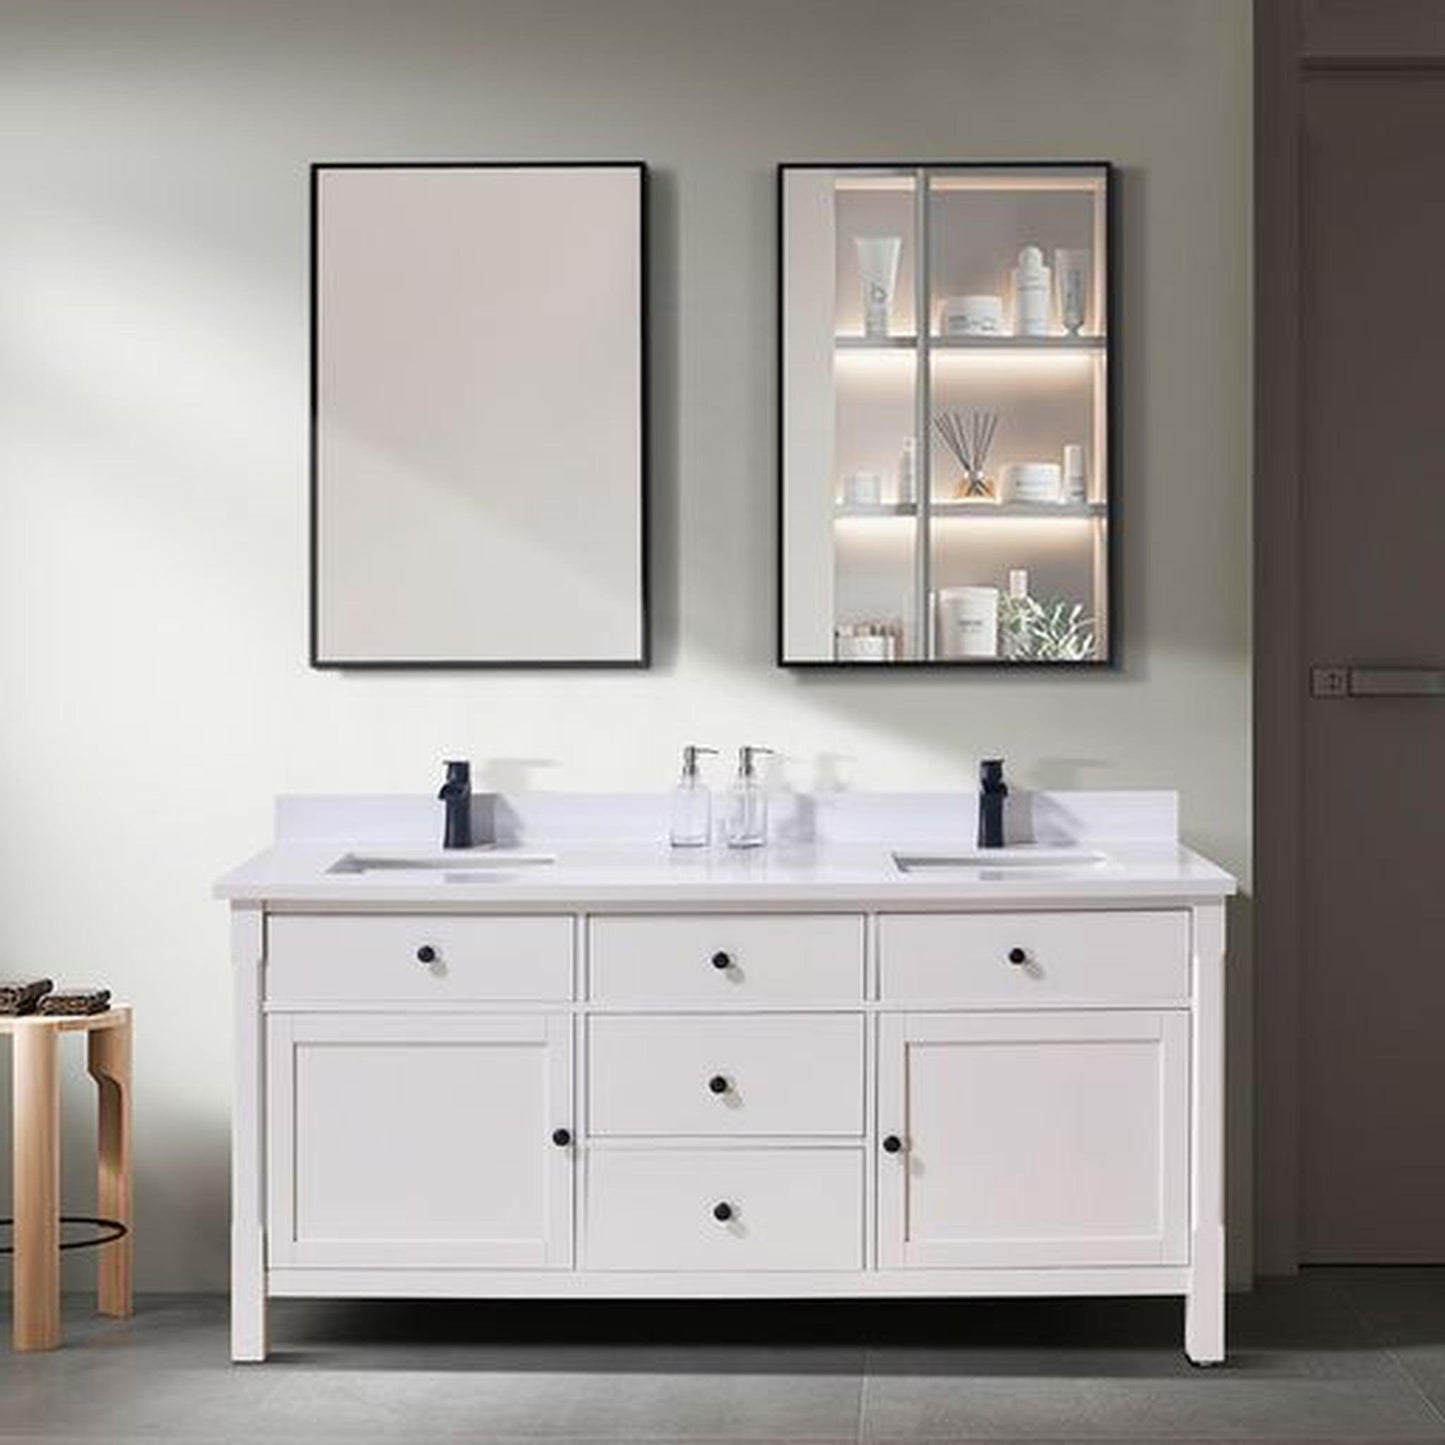 Altair Caorle 73" x 22" Snow White Composite Stone Bathroom Vanity Top With White SInk